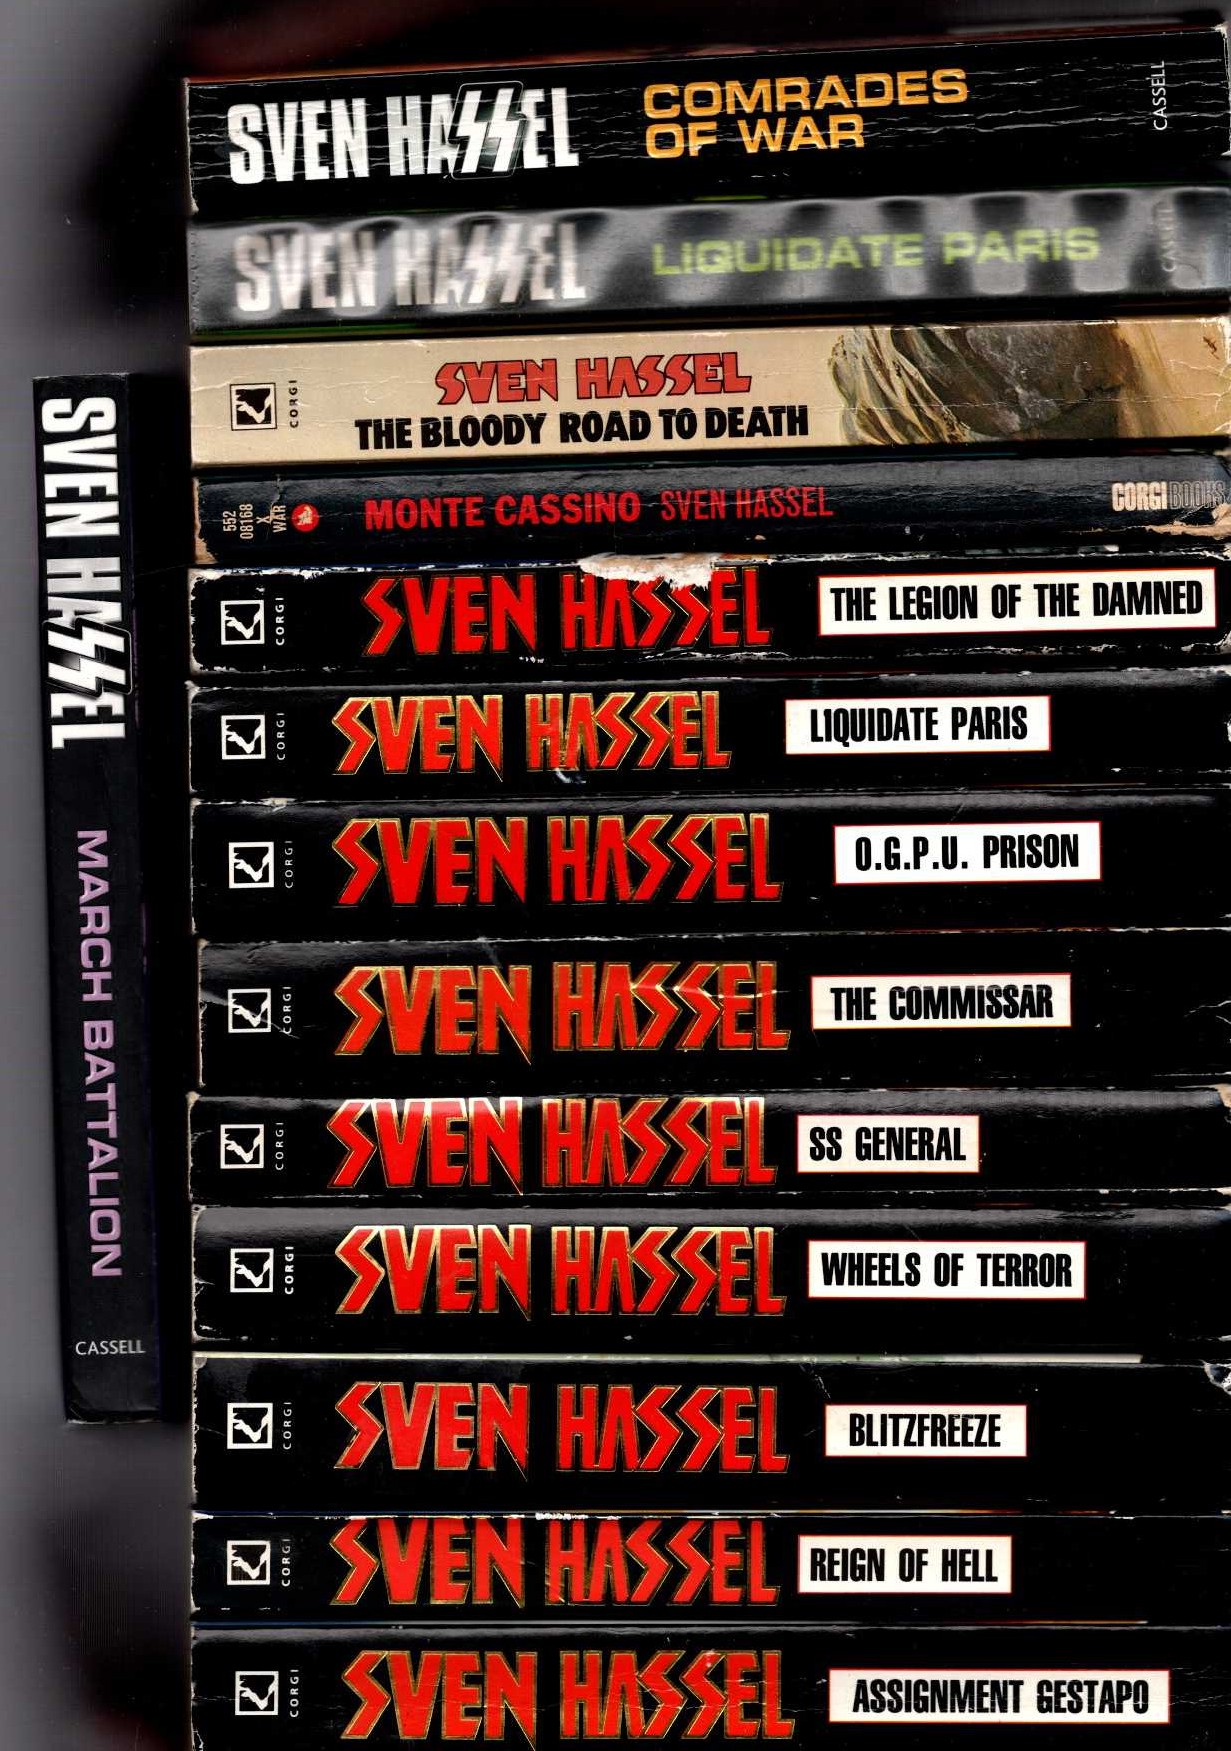 Sven Hassel  SET OF 14 WARTIME BOOKS front book cover image